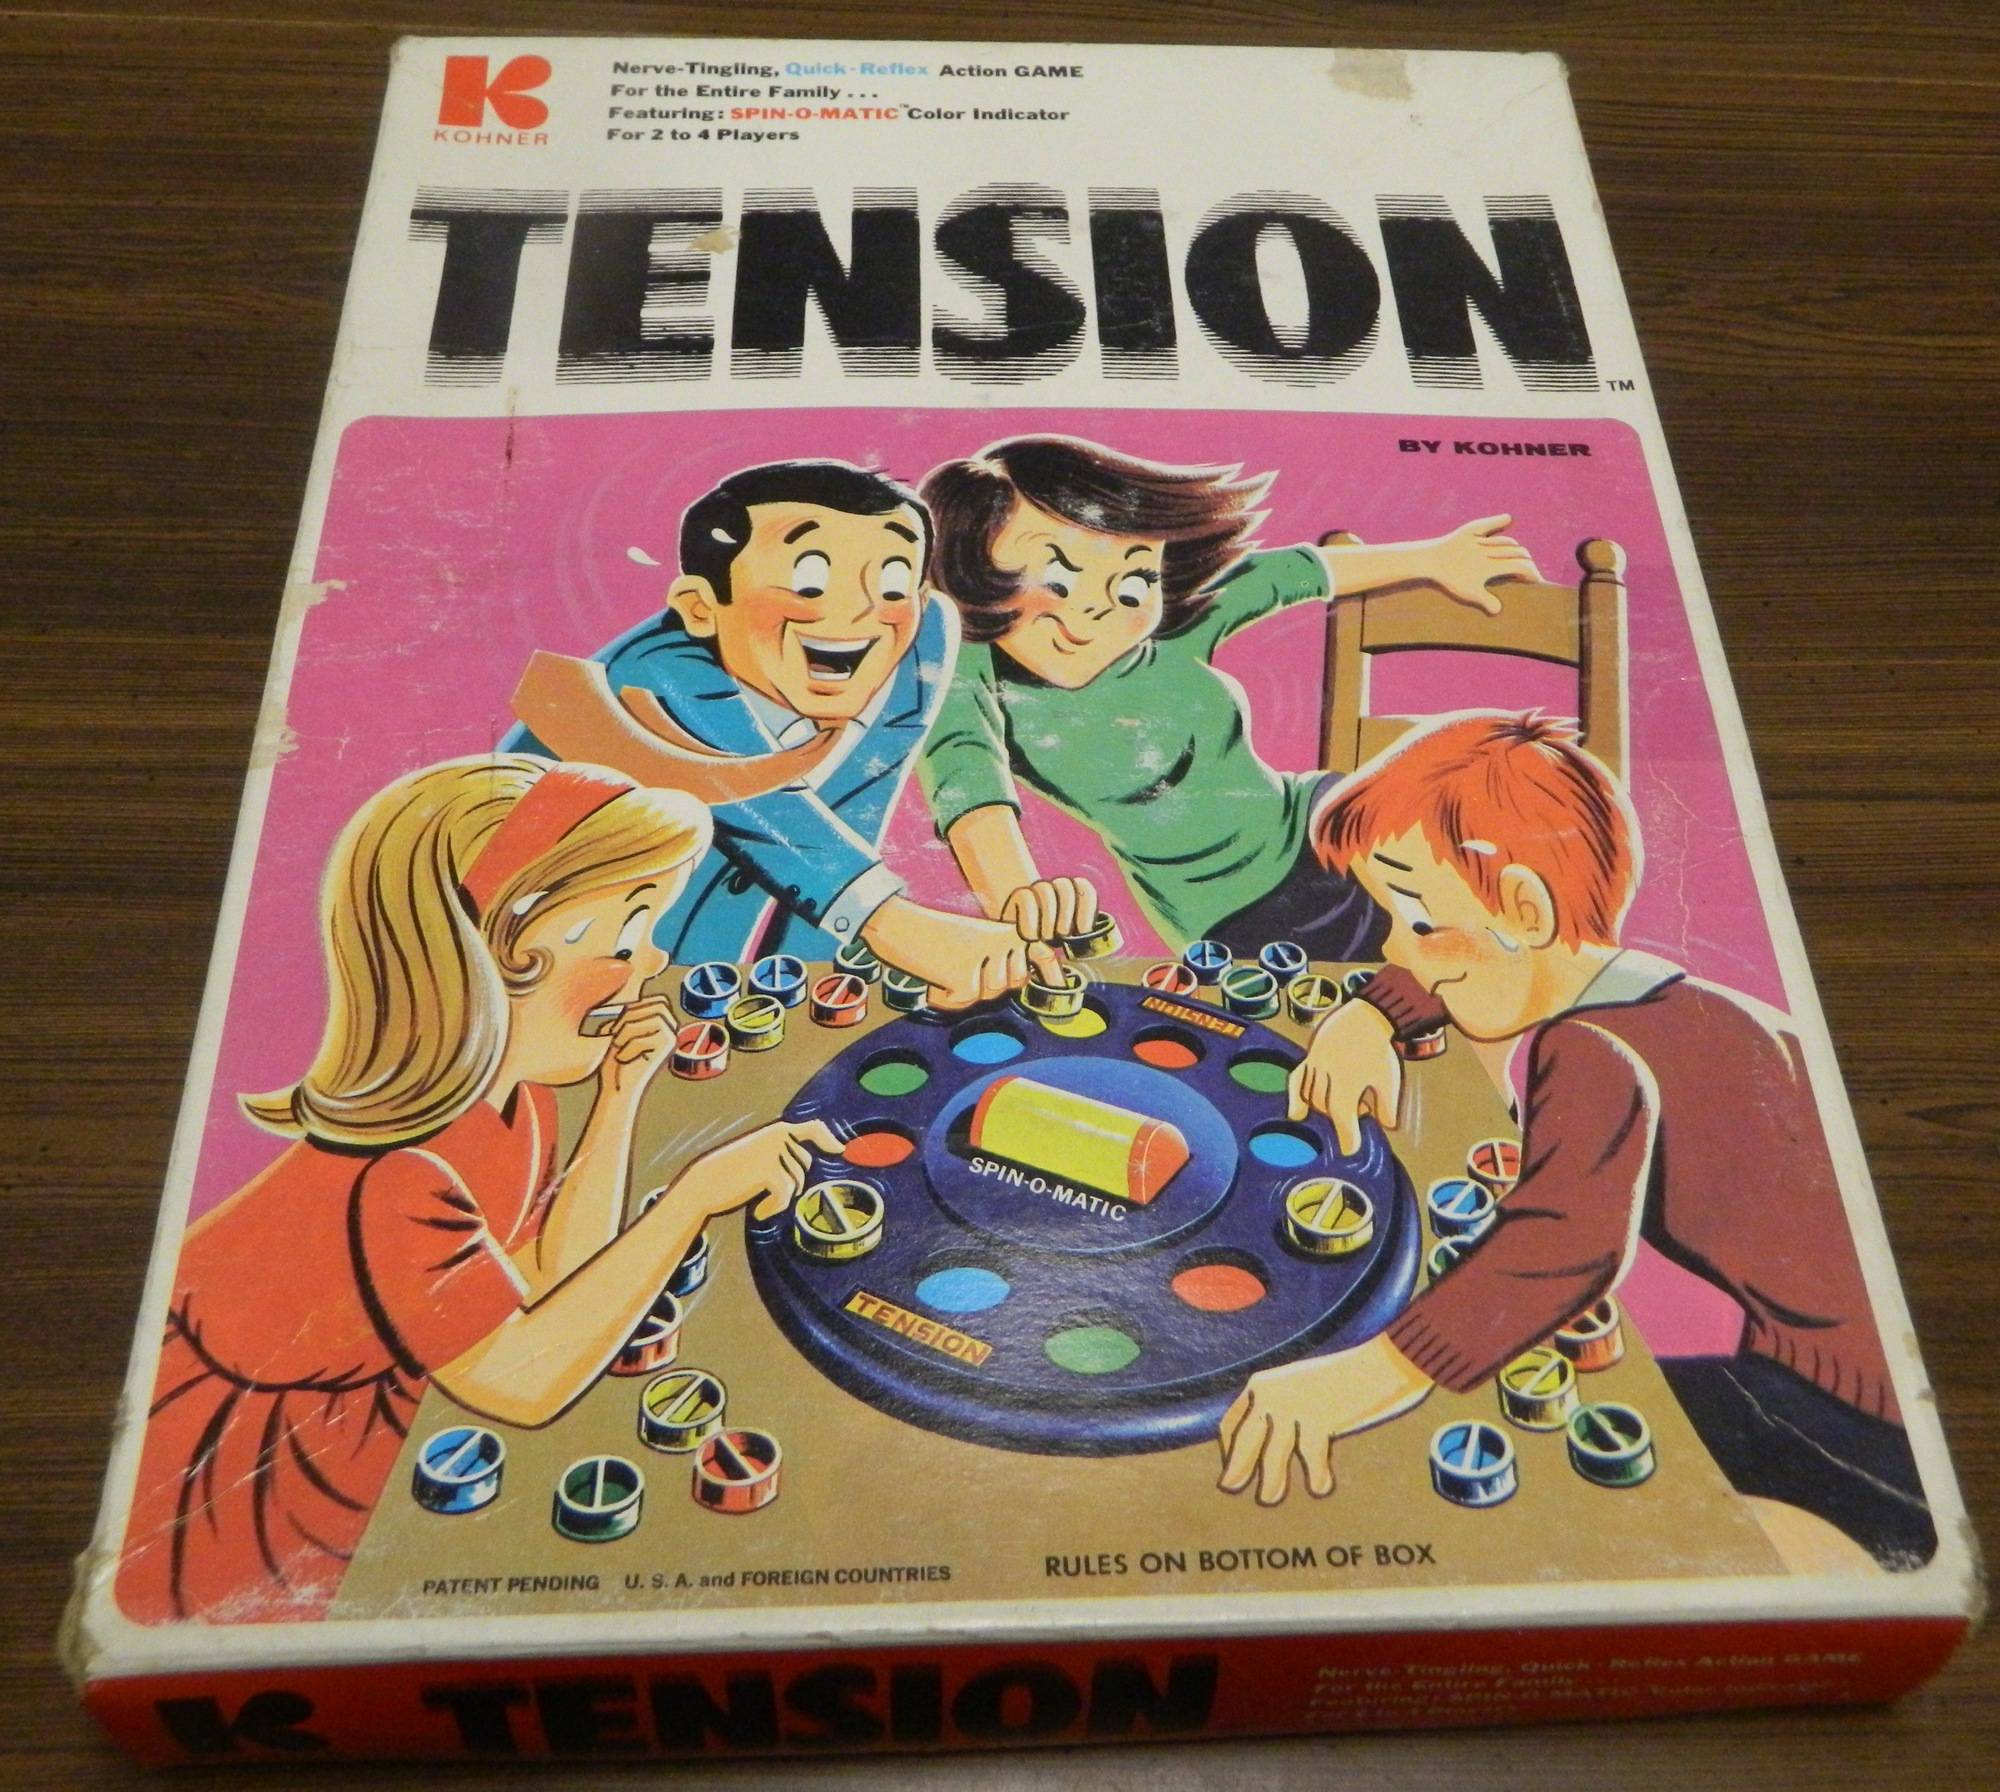 Tension Board Game Review and Rules